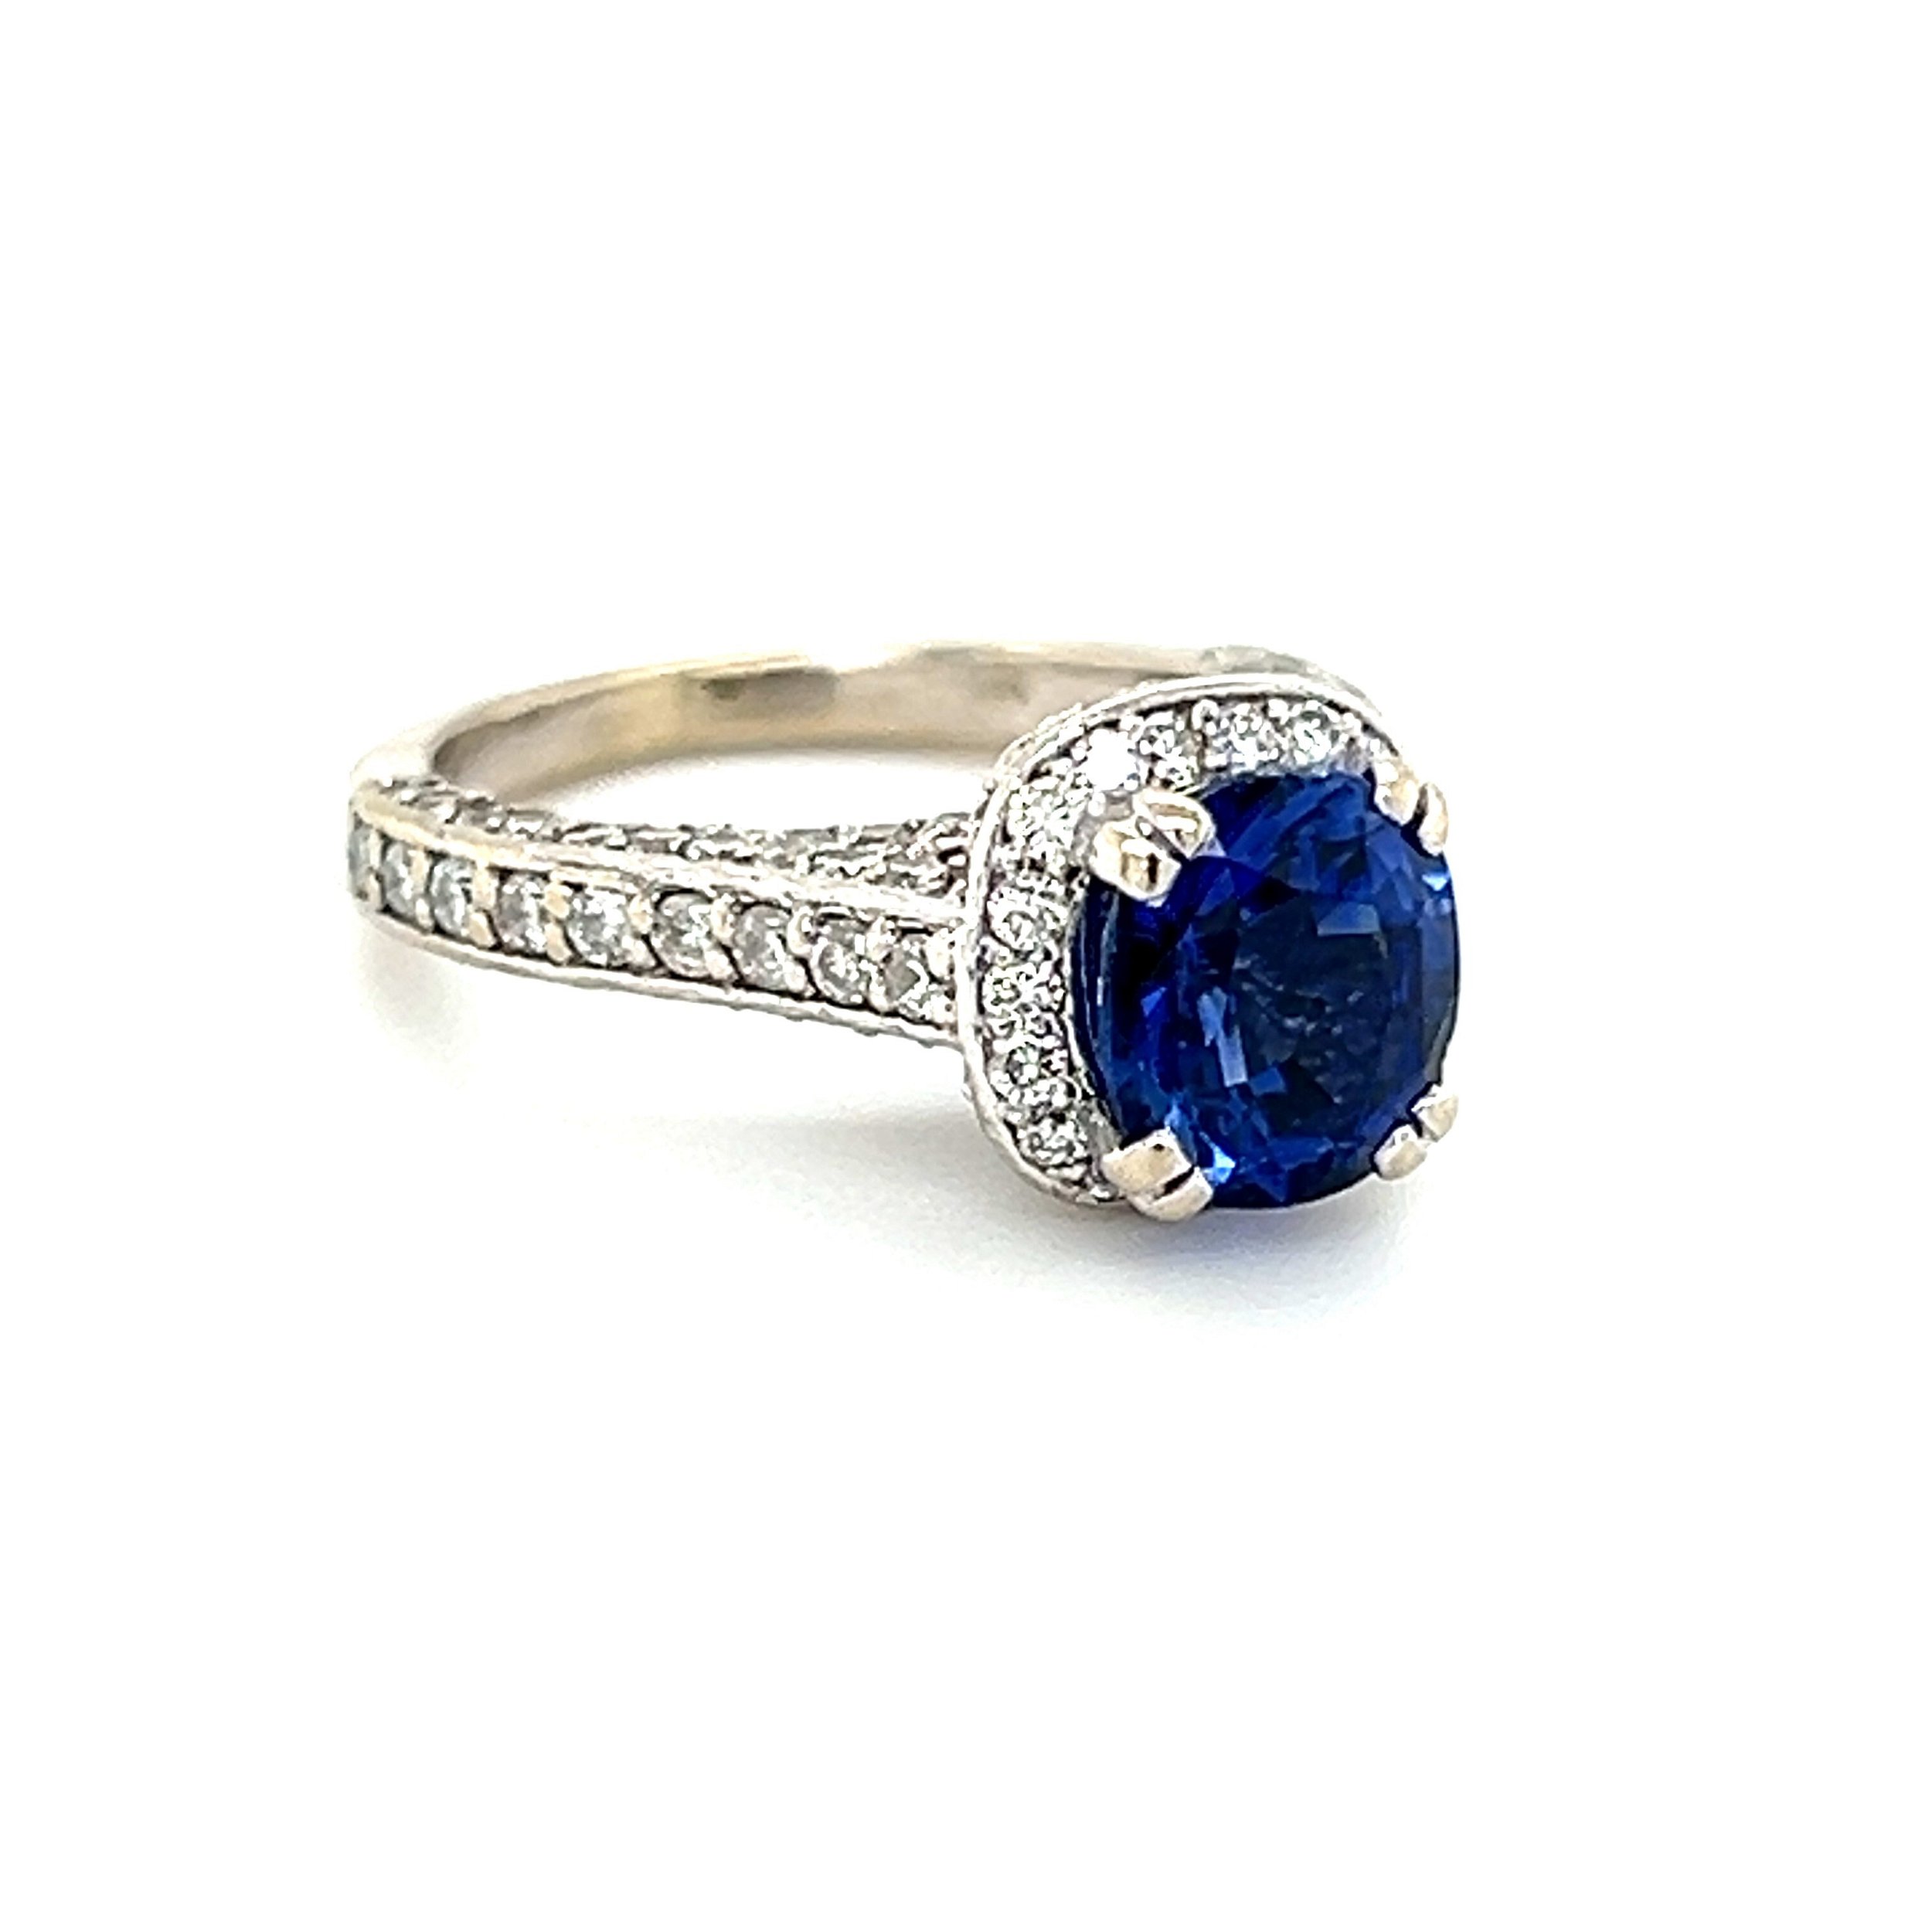 14k White Gold 1.79ct Blue Sapphire and Diamond Ring